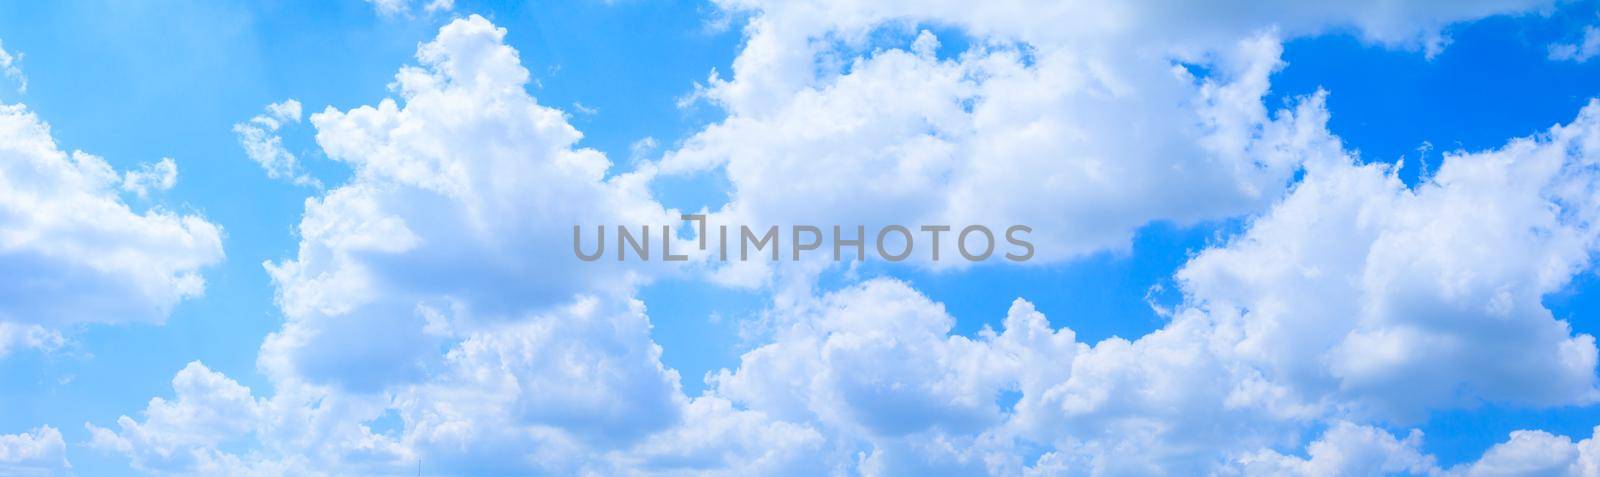 panoramic sky and cloud summertime beautiful background by pramot